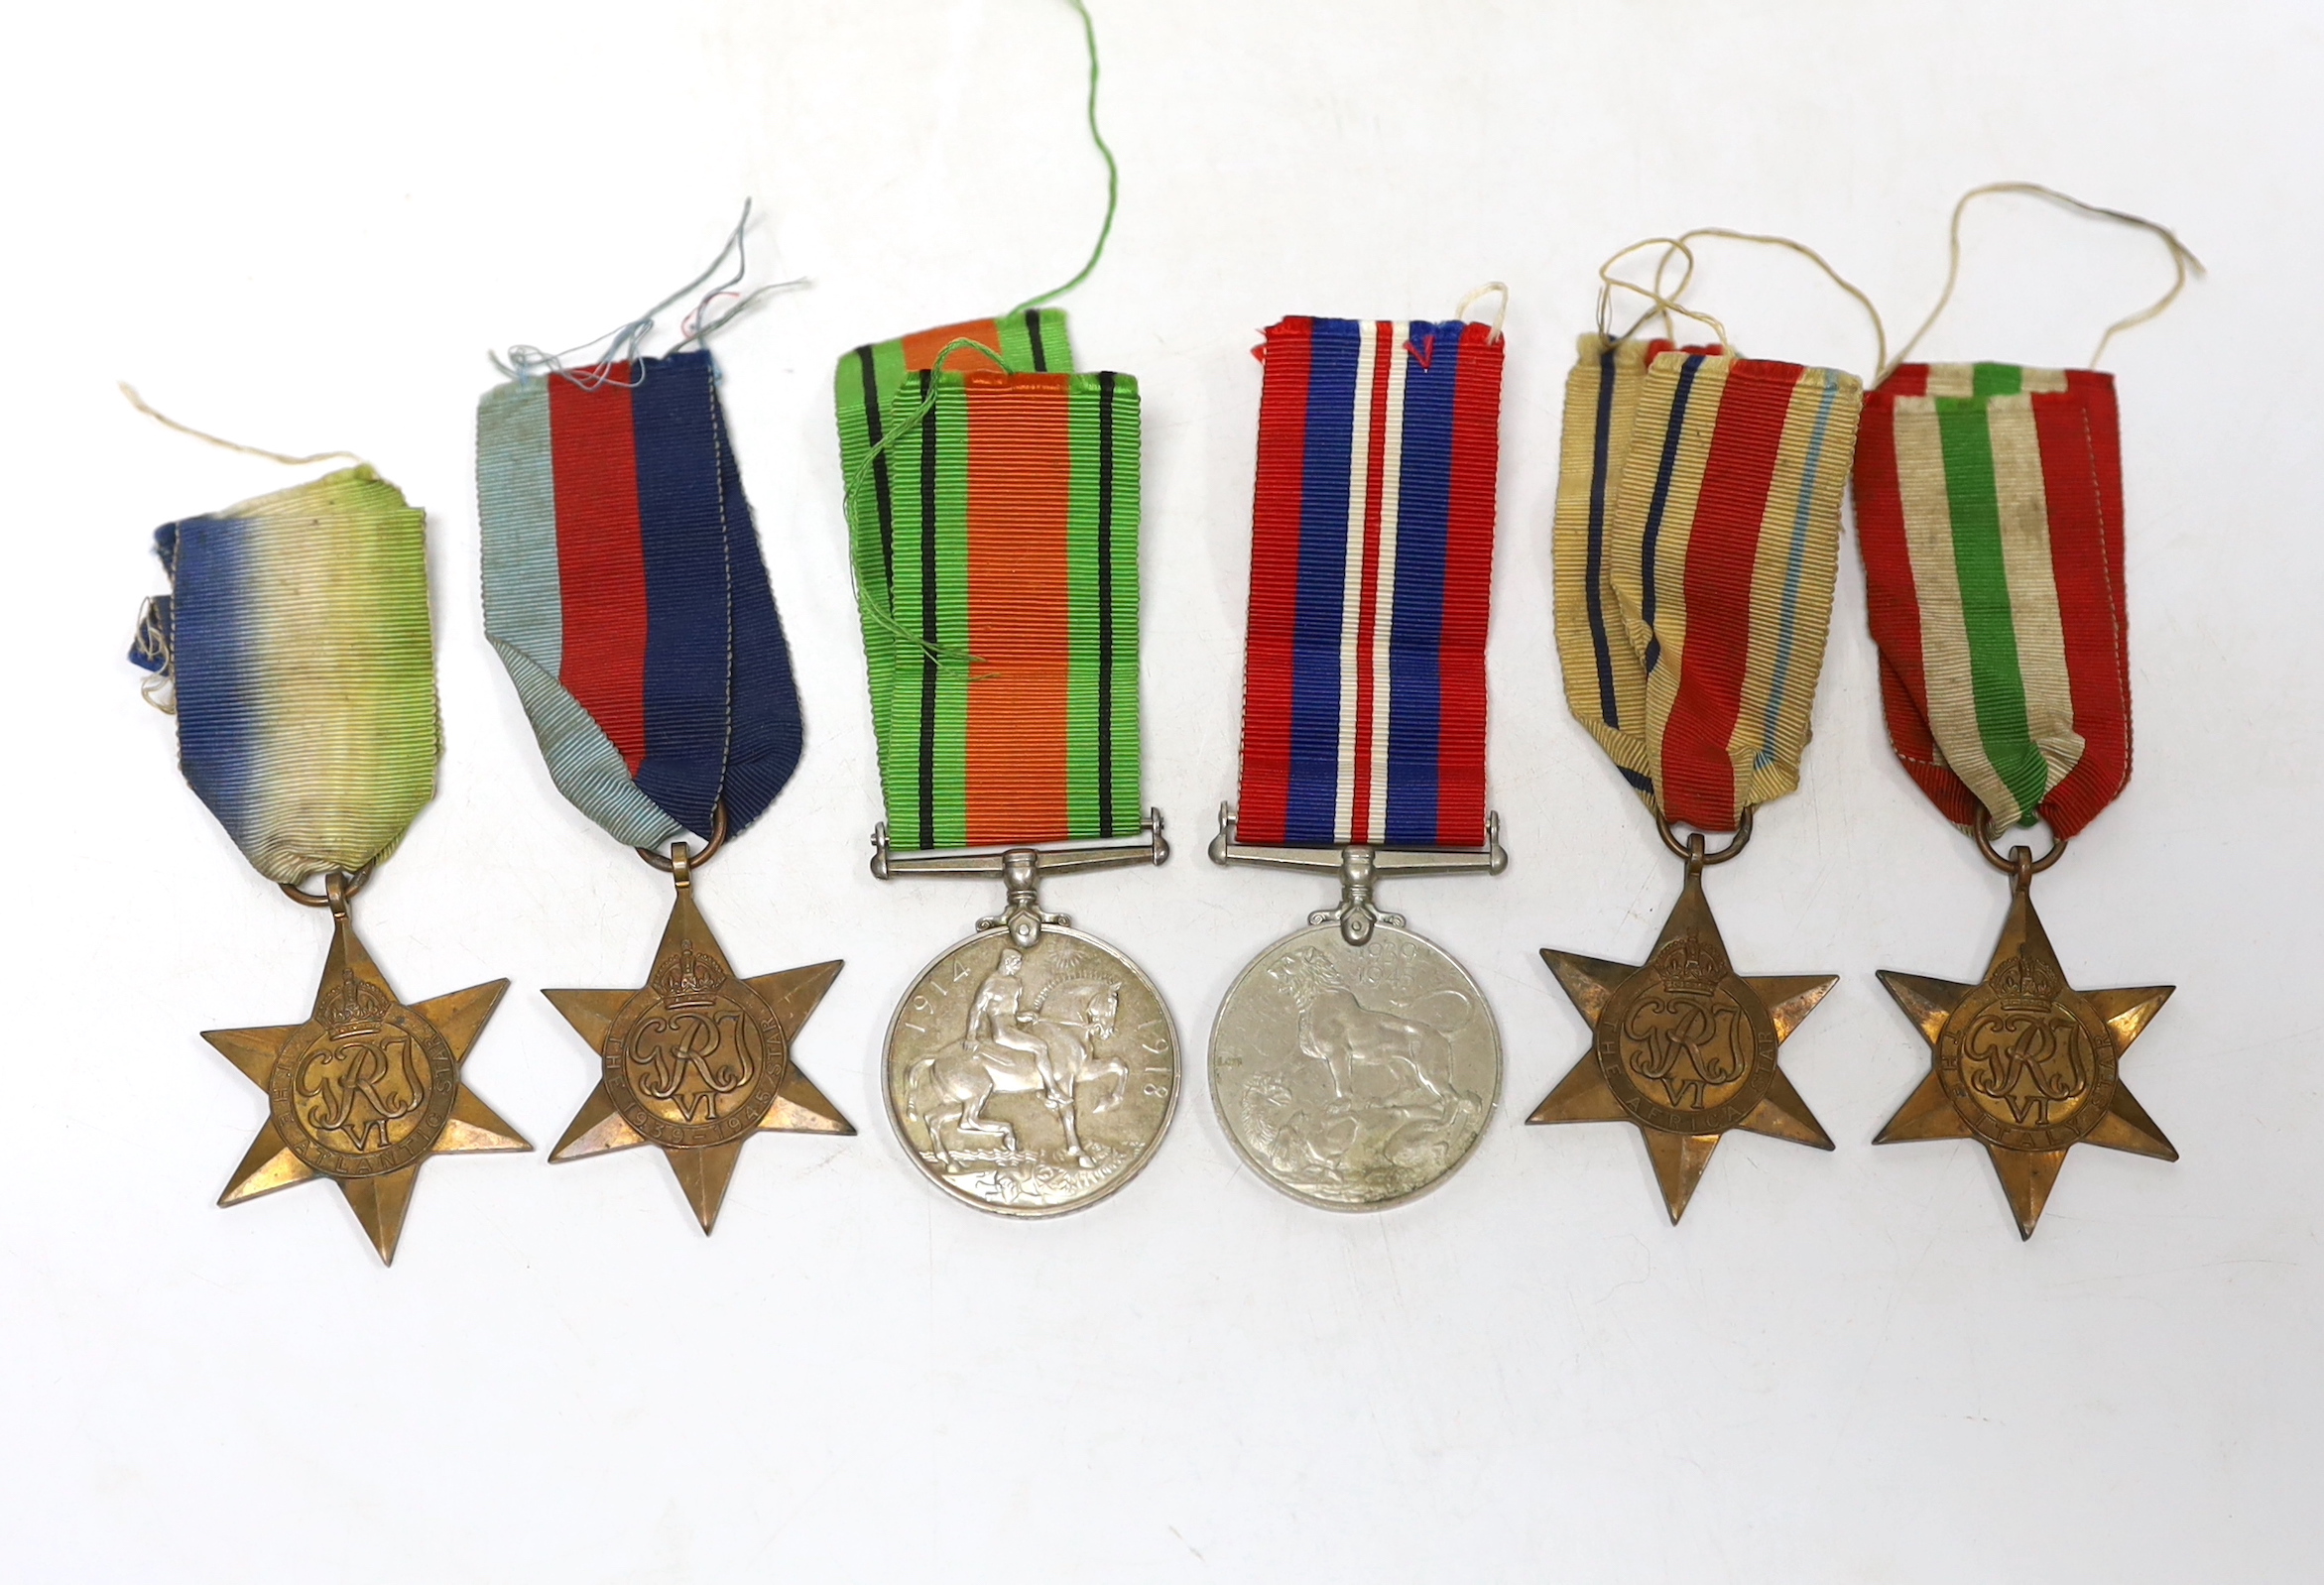 Six WWII medals. The Atlantic Star, The Italy Star, The Africa Star, The 1939-45 Star, The Defence Medal and The War Medal